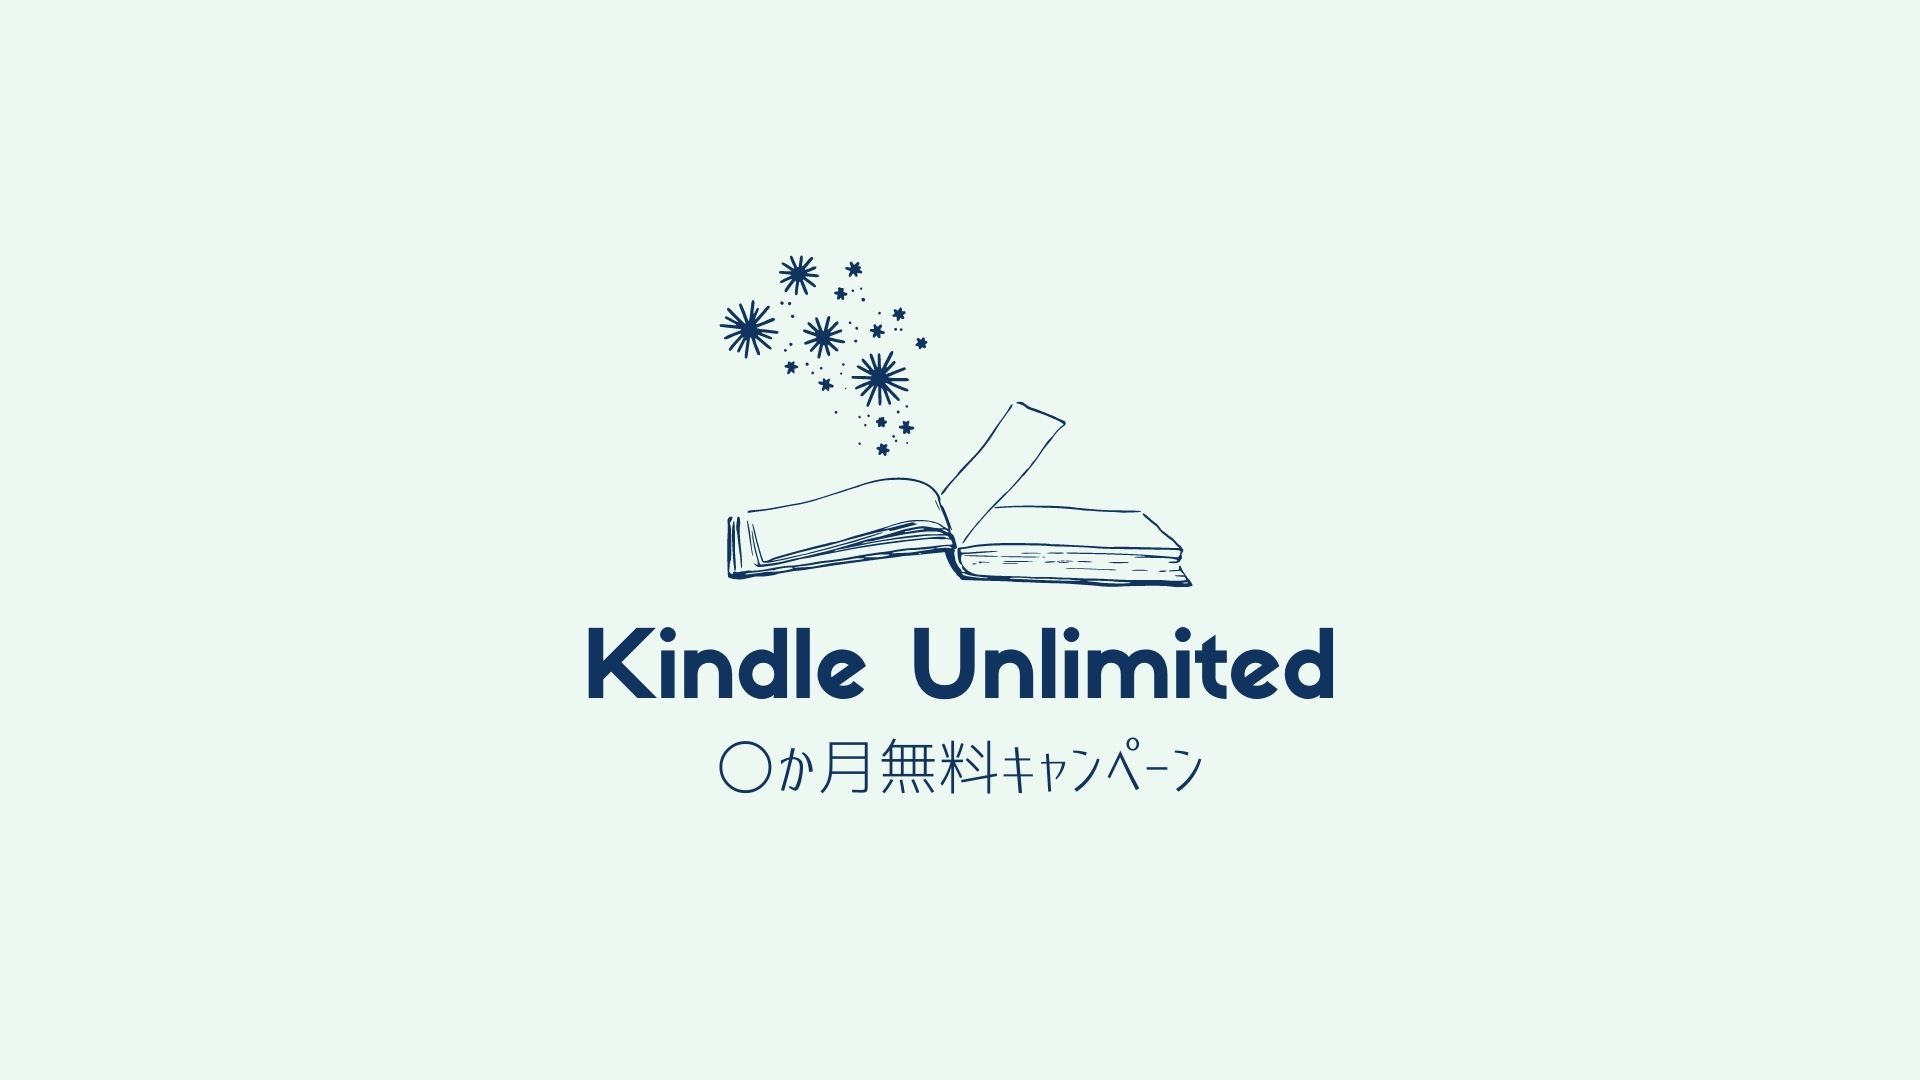 Kindle unlimitedキャンペーン情報